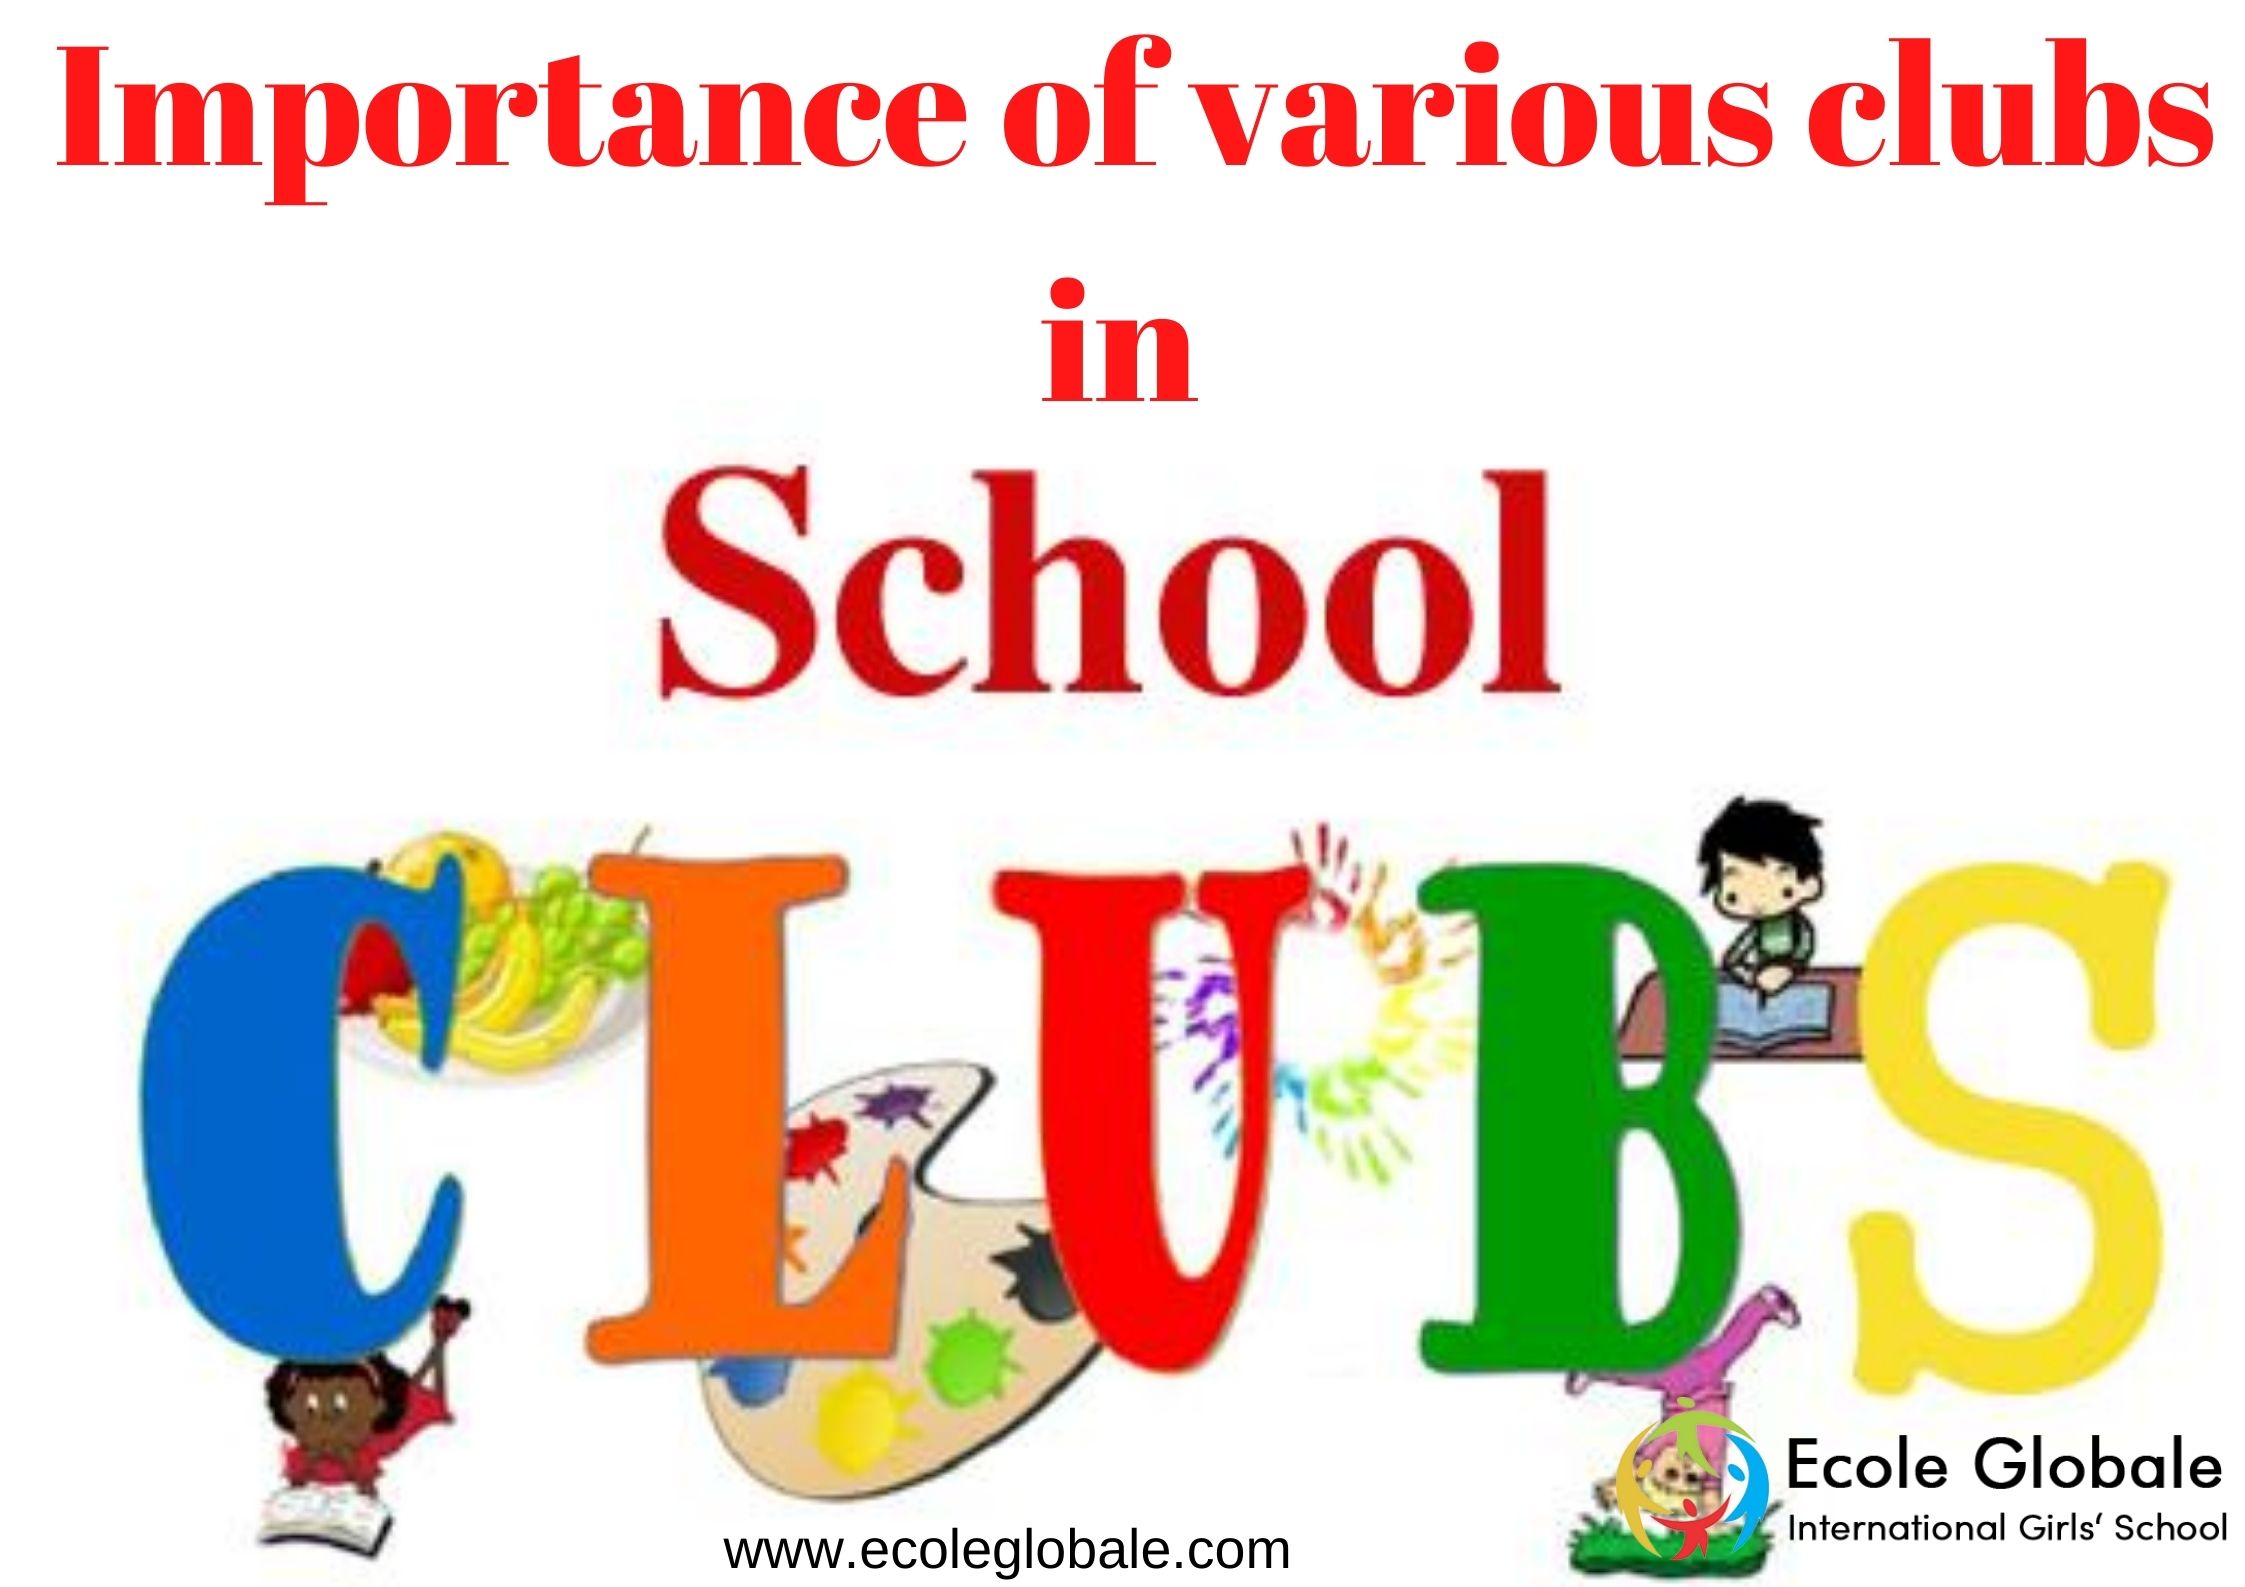 Importance of various clubs in school